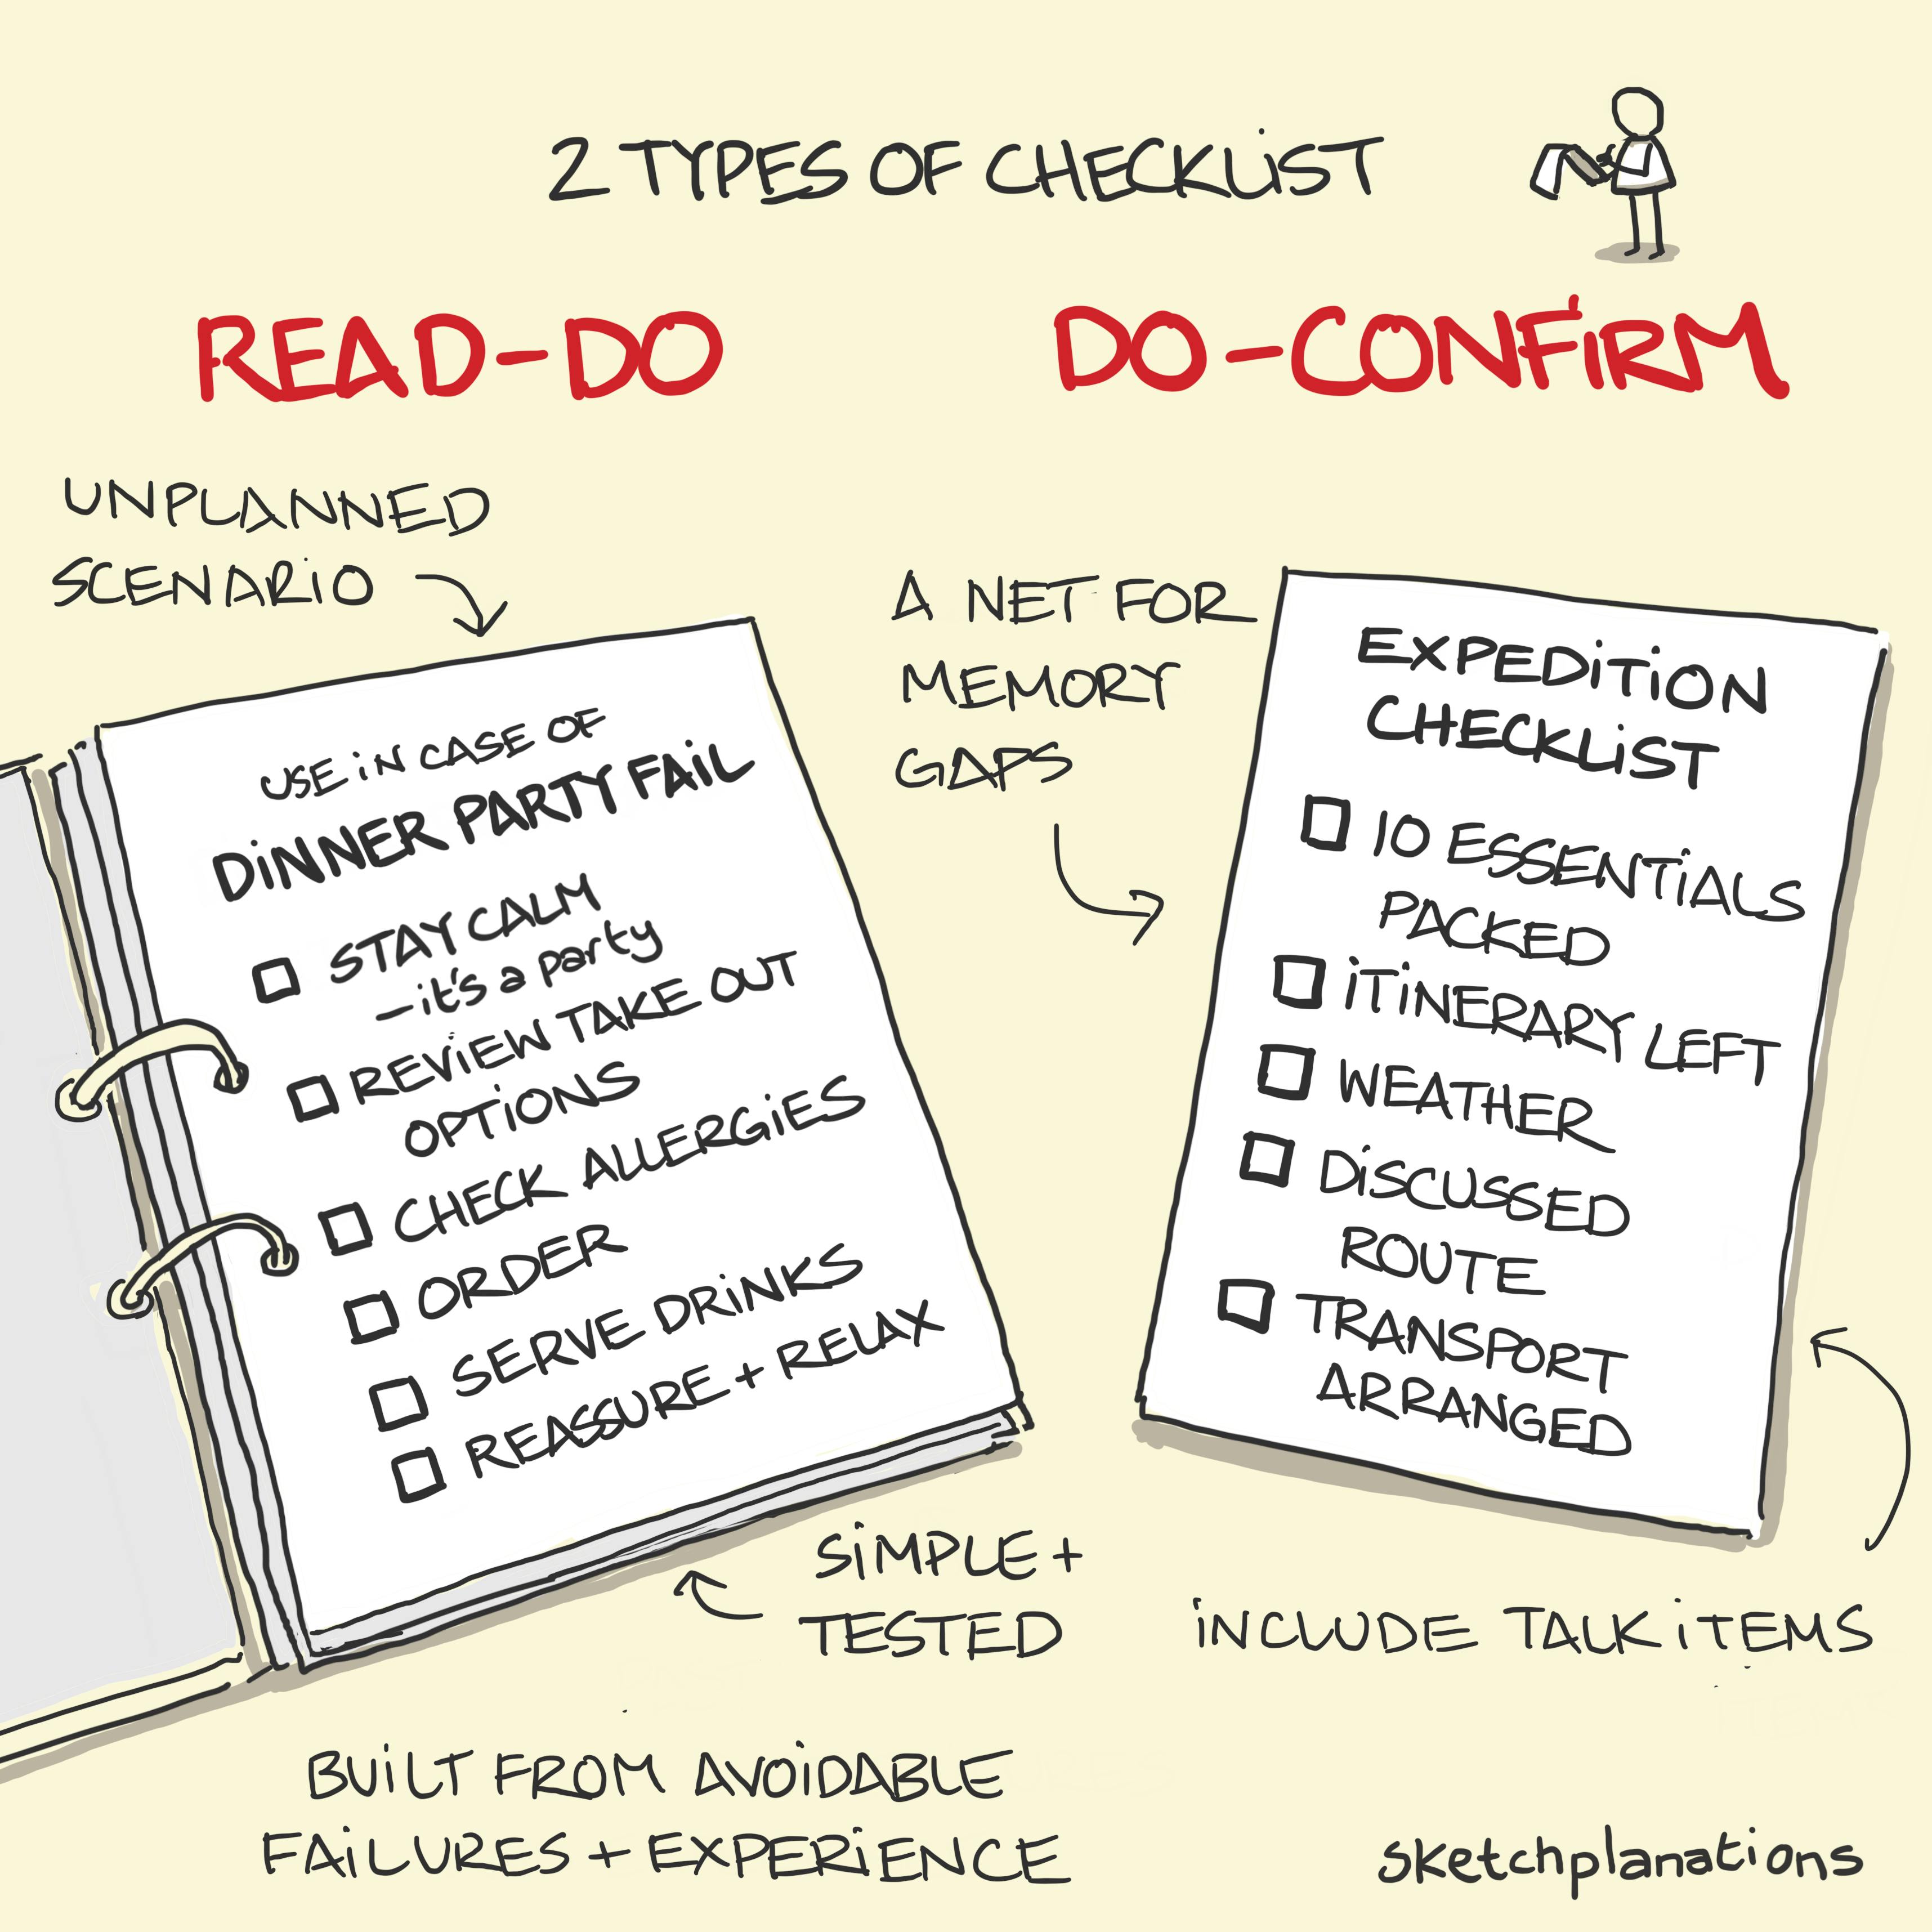 Read-Do and Do-Confirm checklists illustration: examples of a Dinner party fail and an Expedition checklist